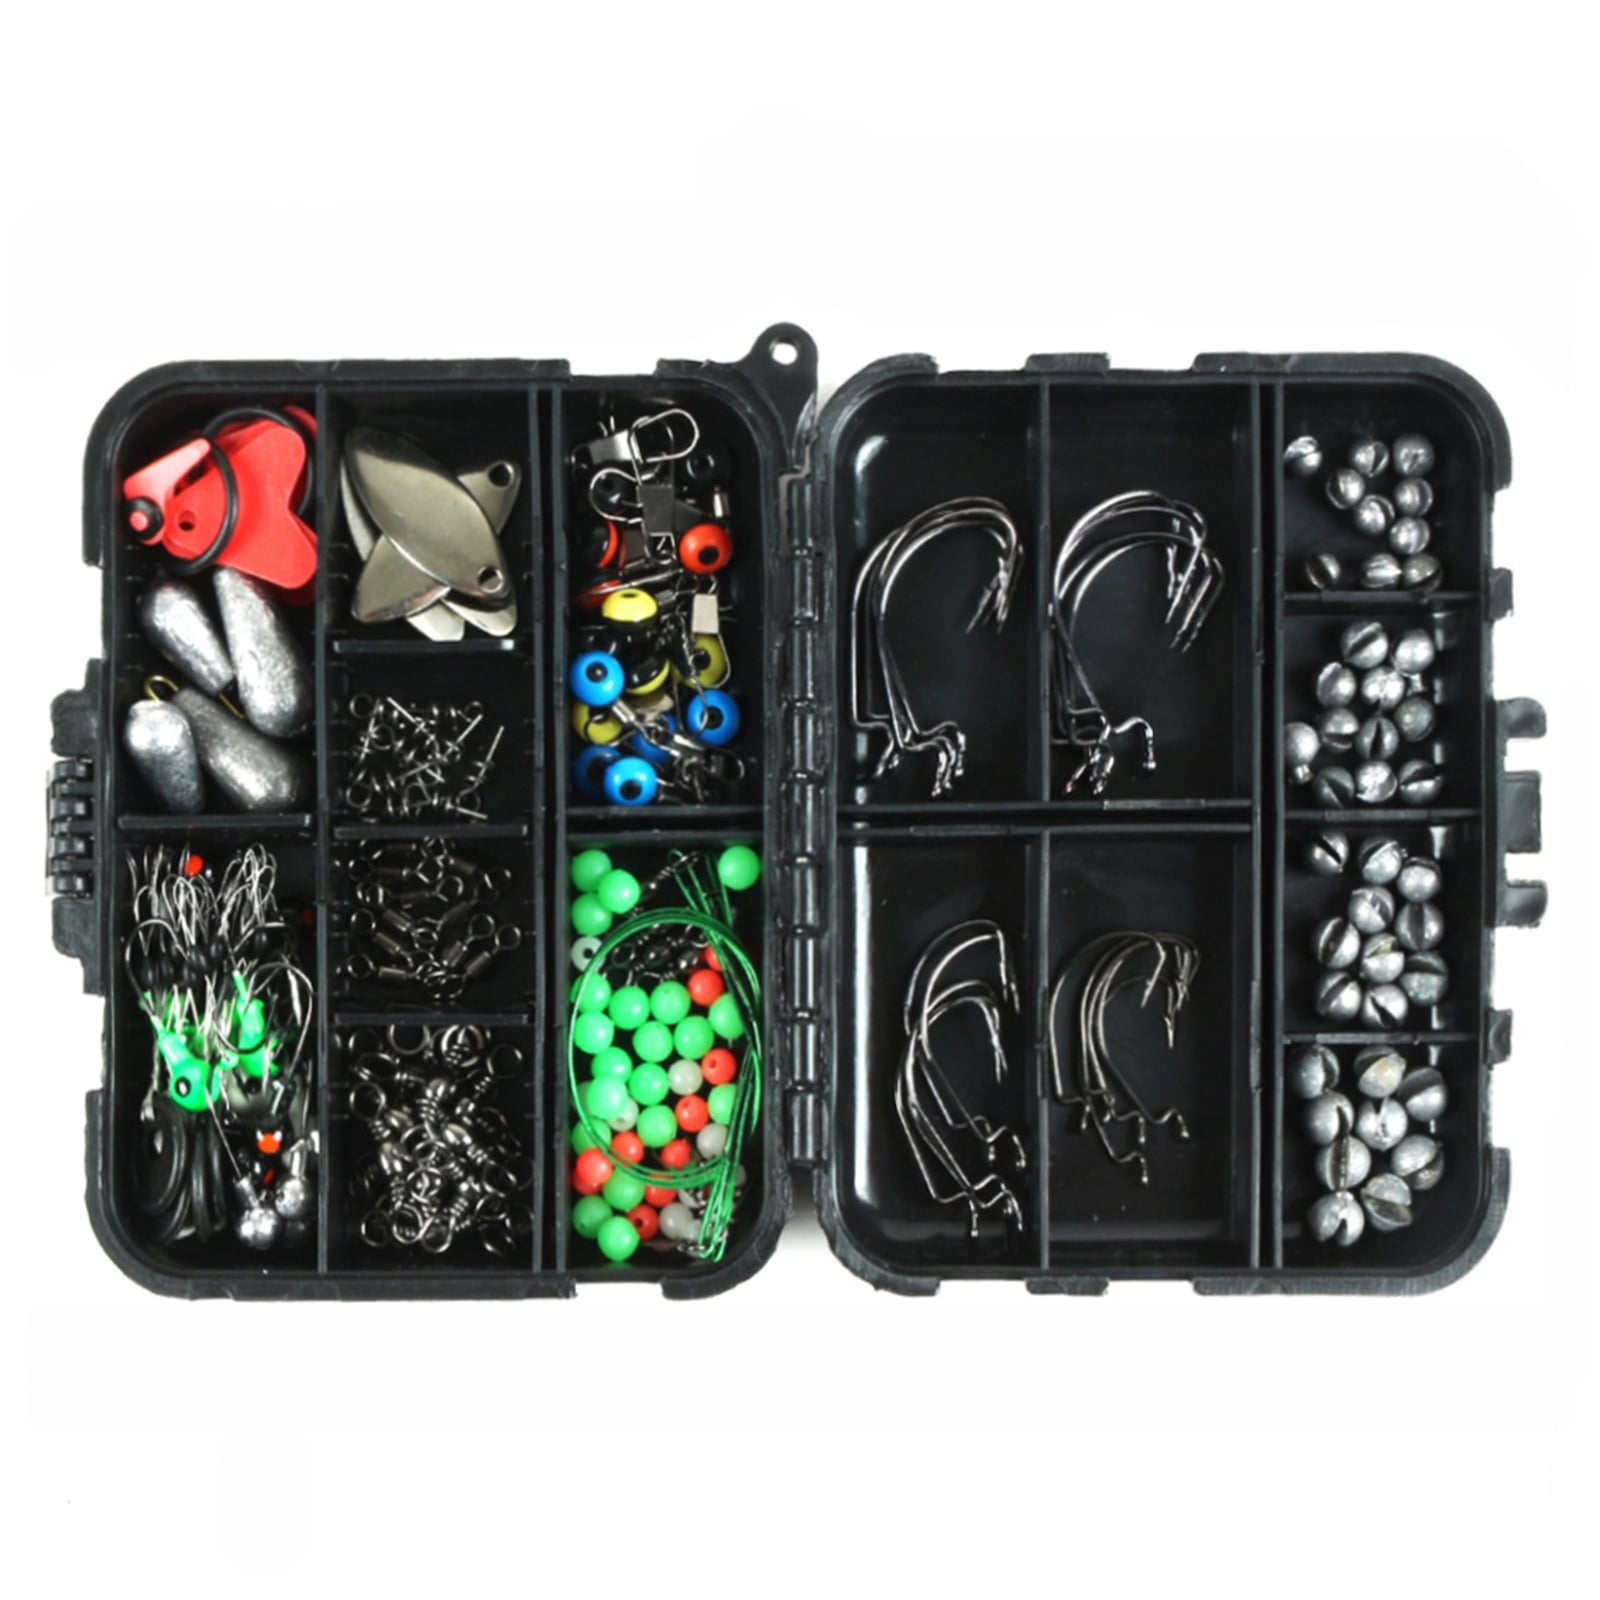 160pcs/box Fishing Accessories kit with Tackle Box,Including Fishing  Swivels Snaps, Bass Casting Sinker Weights, Fishing Line Beads,Jig Hooks  price in UAE,  UAE